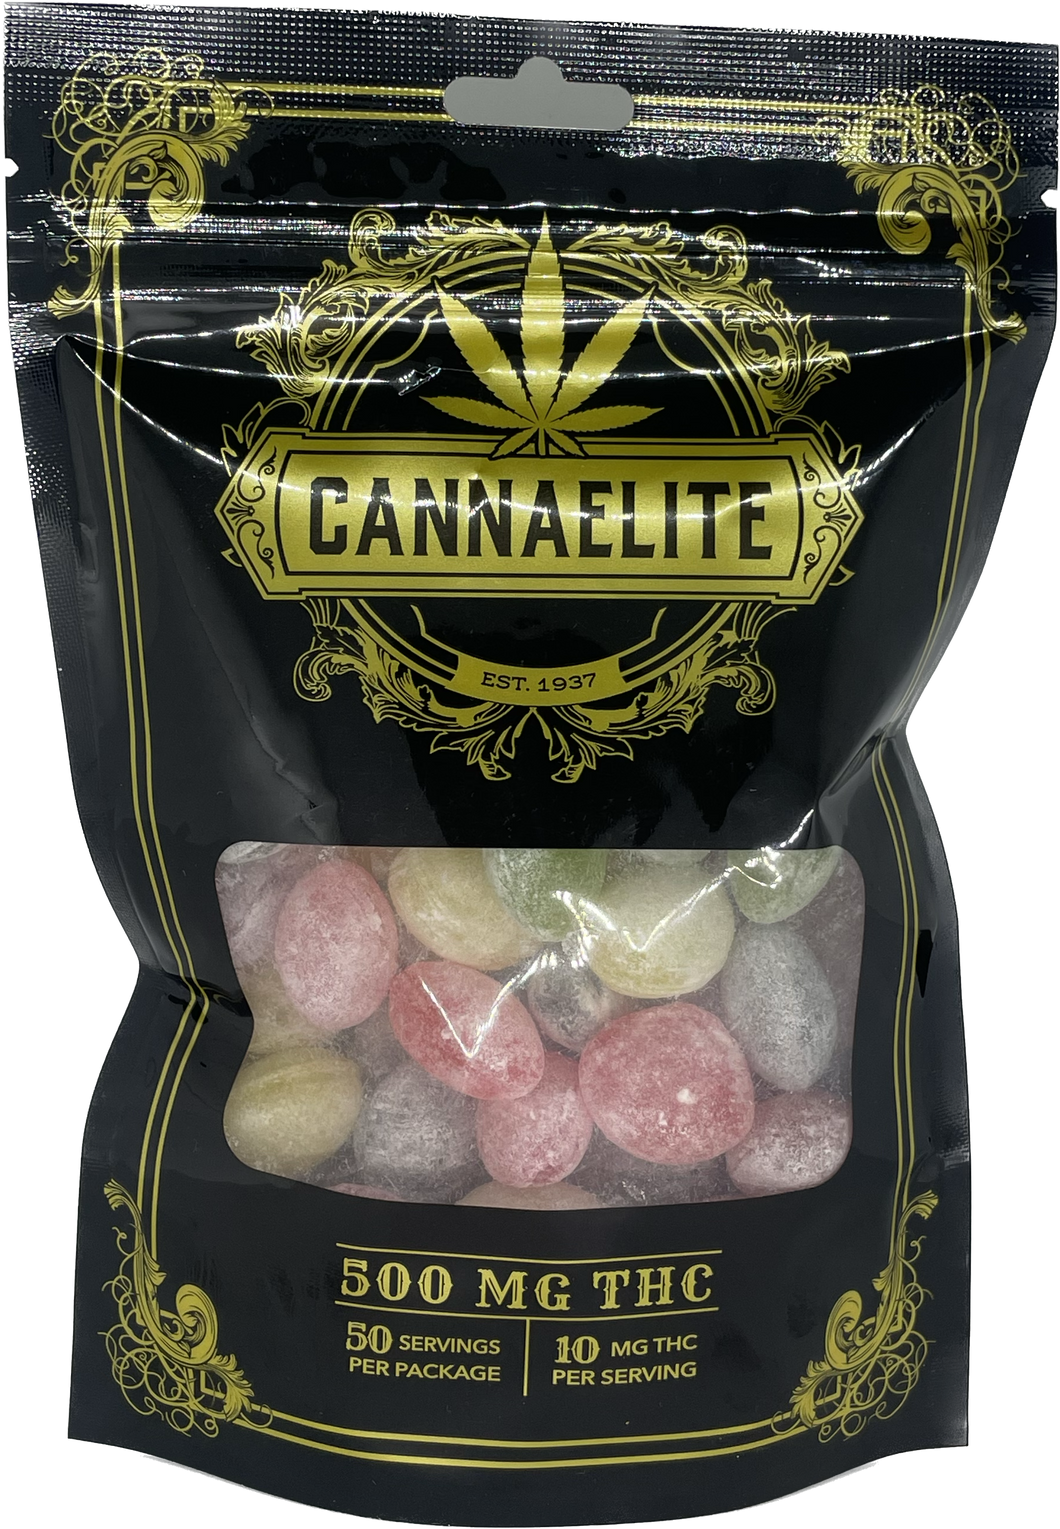 Mixed Hard Candy - 50 pieces